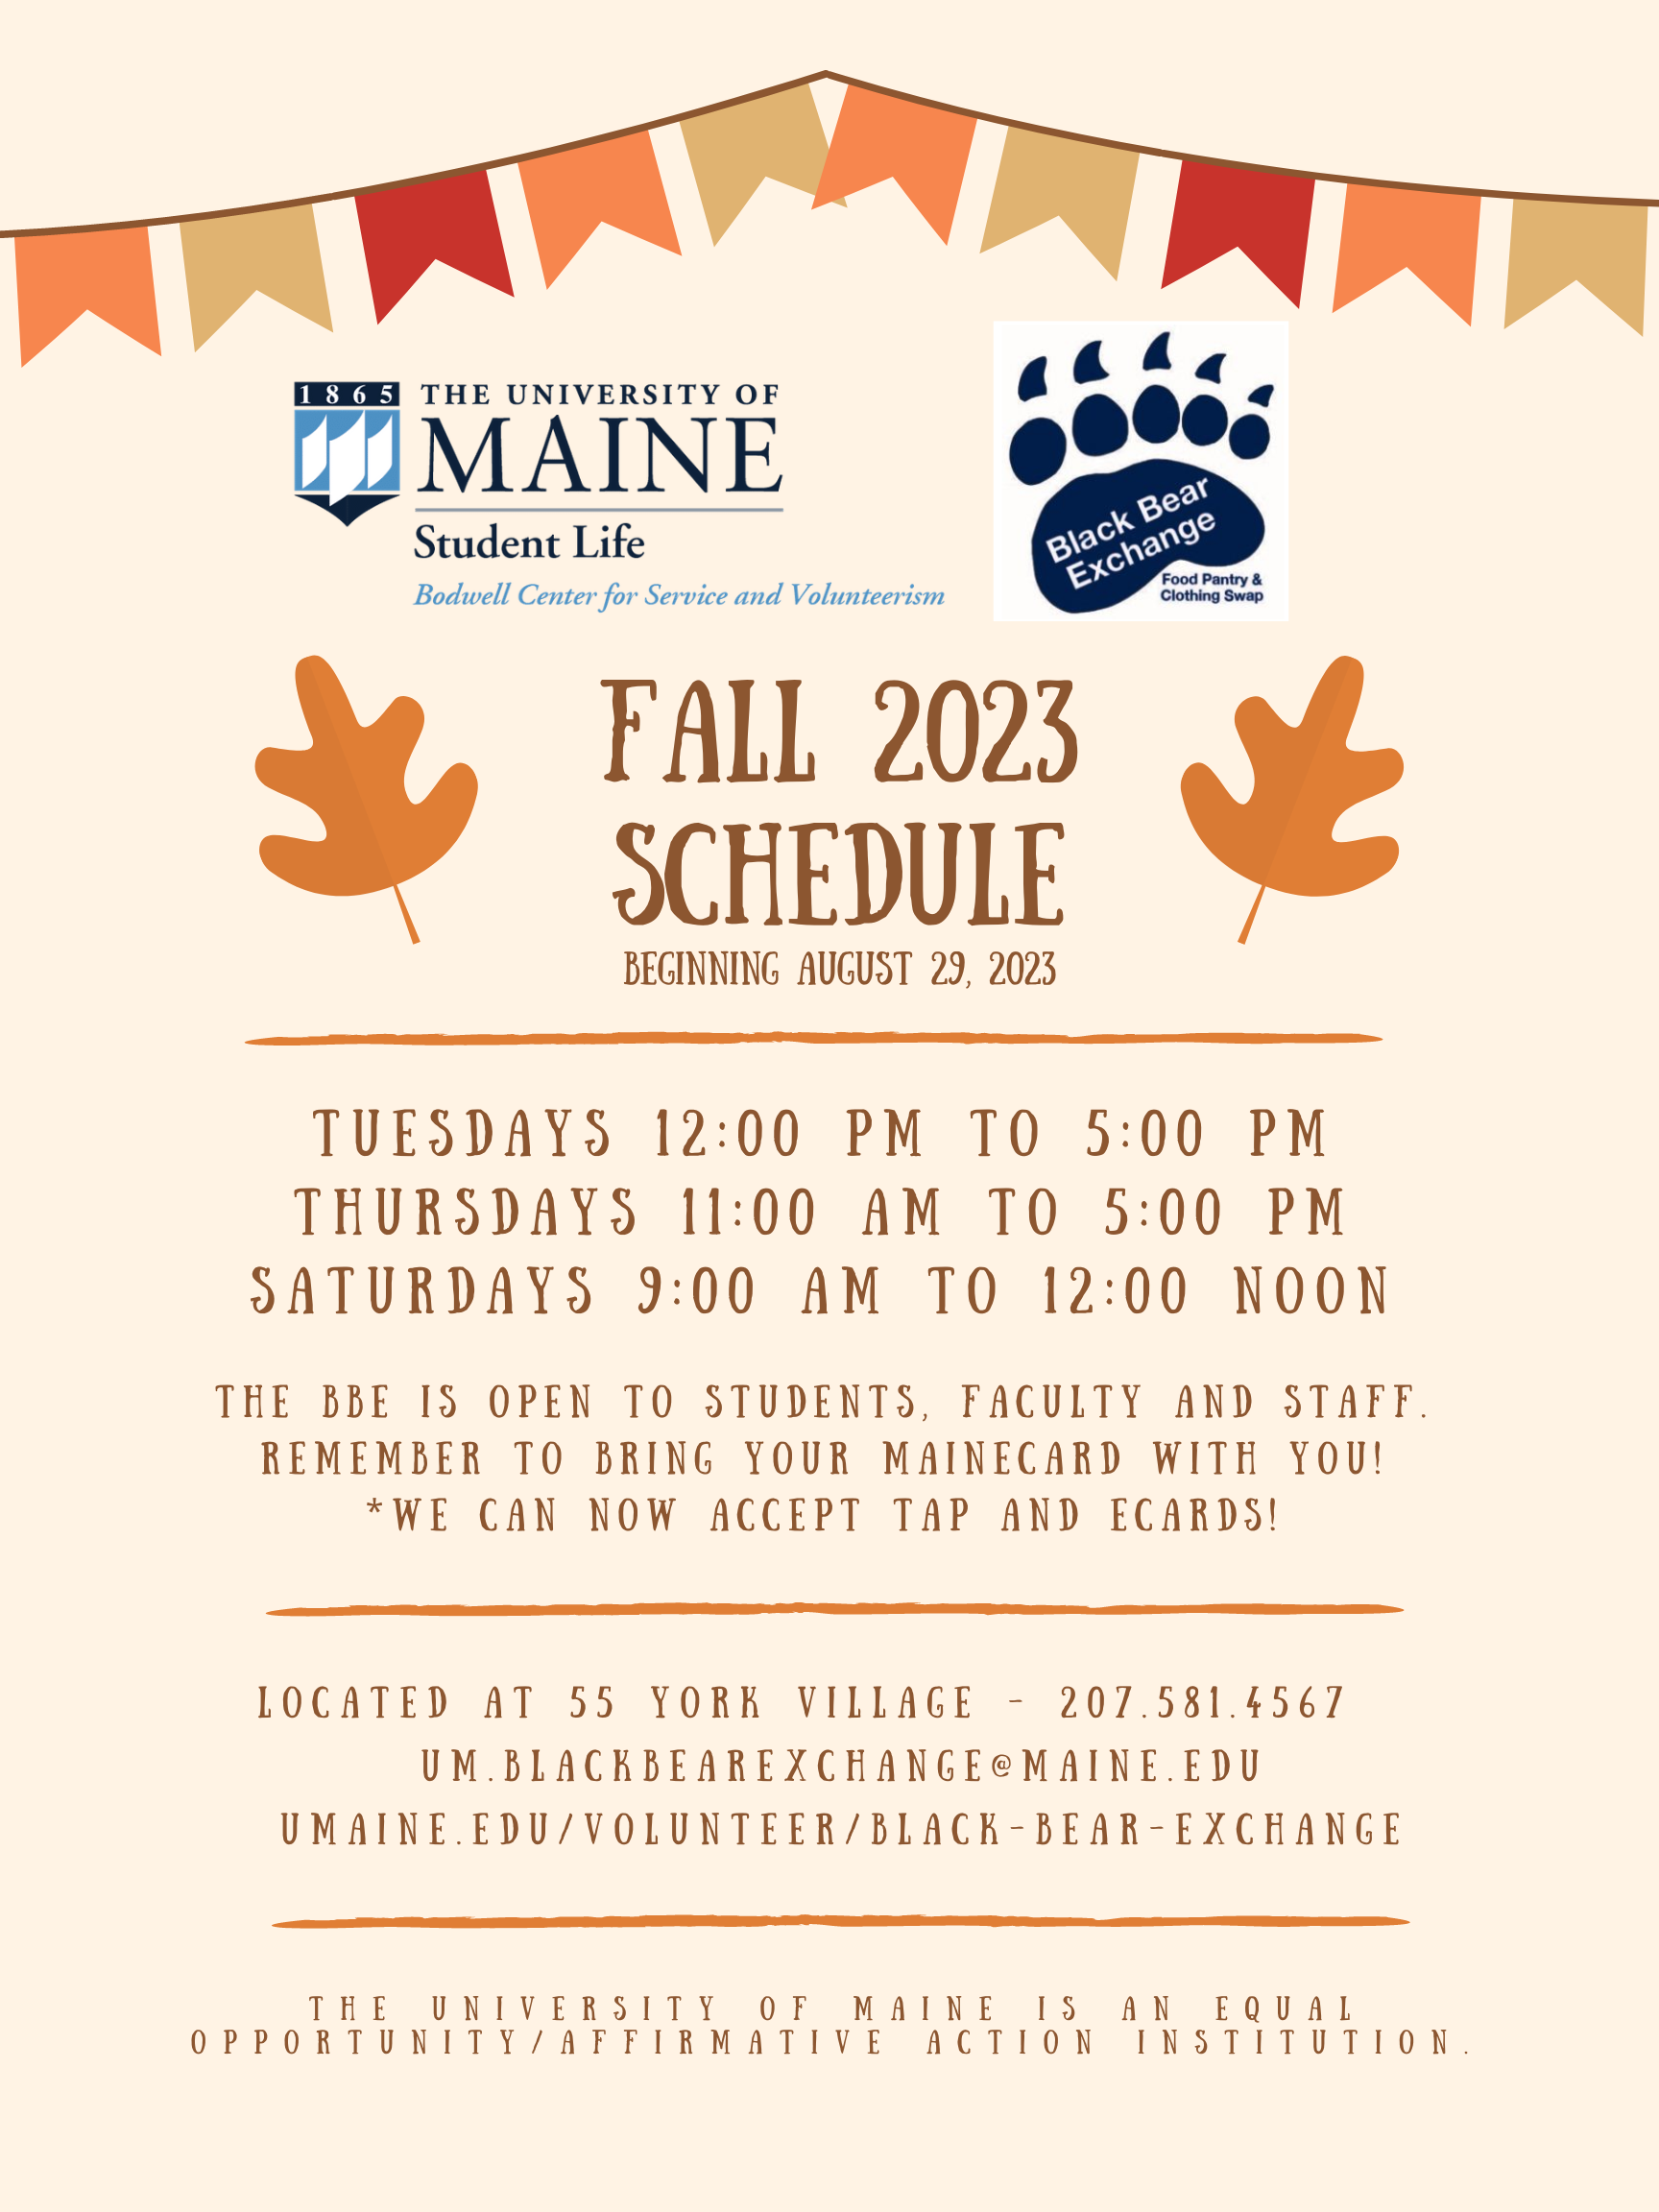 BBE Fall 2023 Schedule, beginning August 29.  Tuesdays 12:00 to 5:00. Thursdays 11:00 to 5:00. Saturdays 9:00 to 12:00.  The BBE is open to students, faculty and staff.  Remember to bring your Mainecard.  We now accept tap and ecards.  Located at 55 York Village.  207.581.4567.